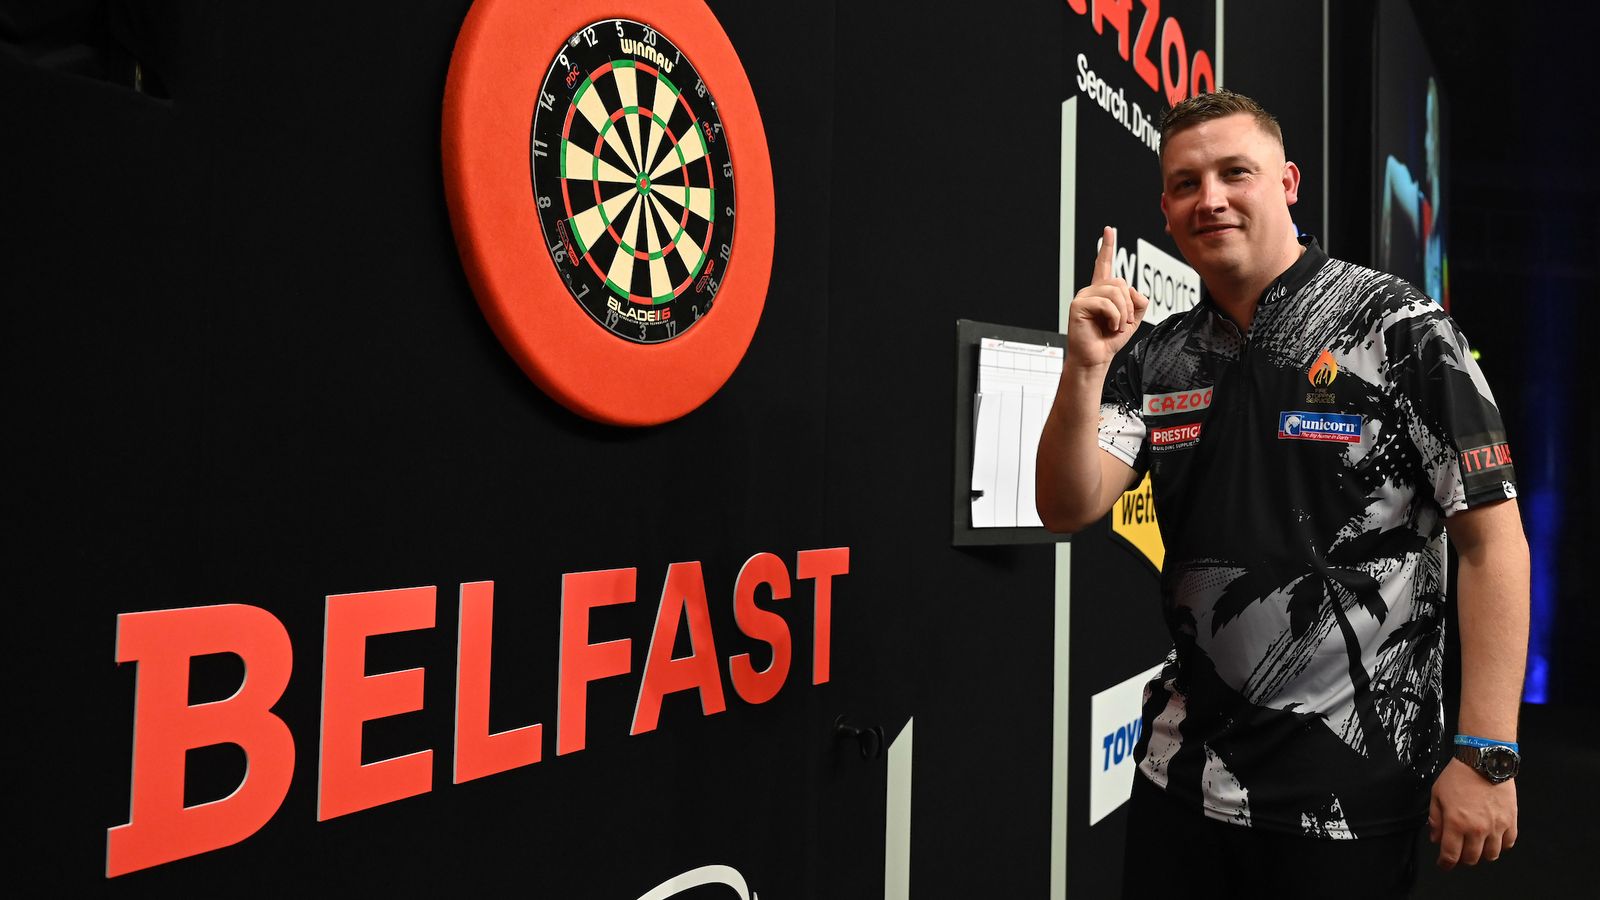 Premier League Darts: Chris Dobey is on cloud nine following victory in Belfast but he also has Wembley on his mind